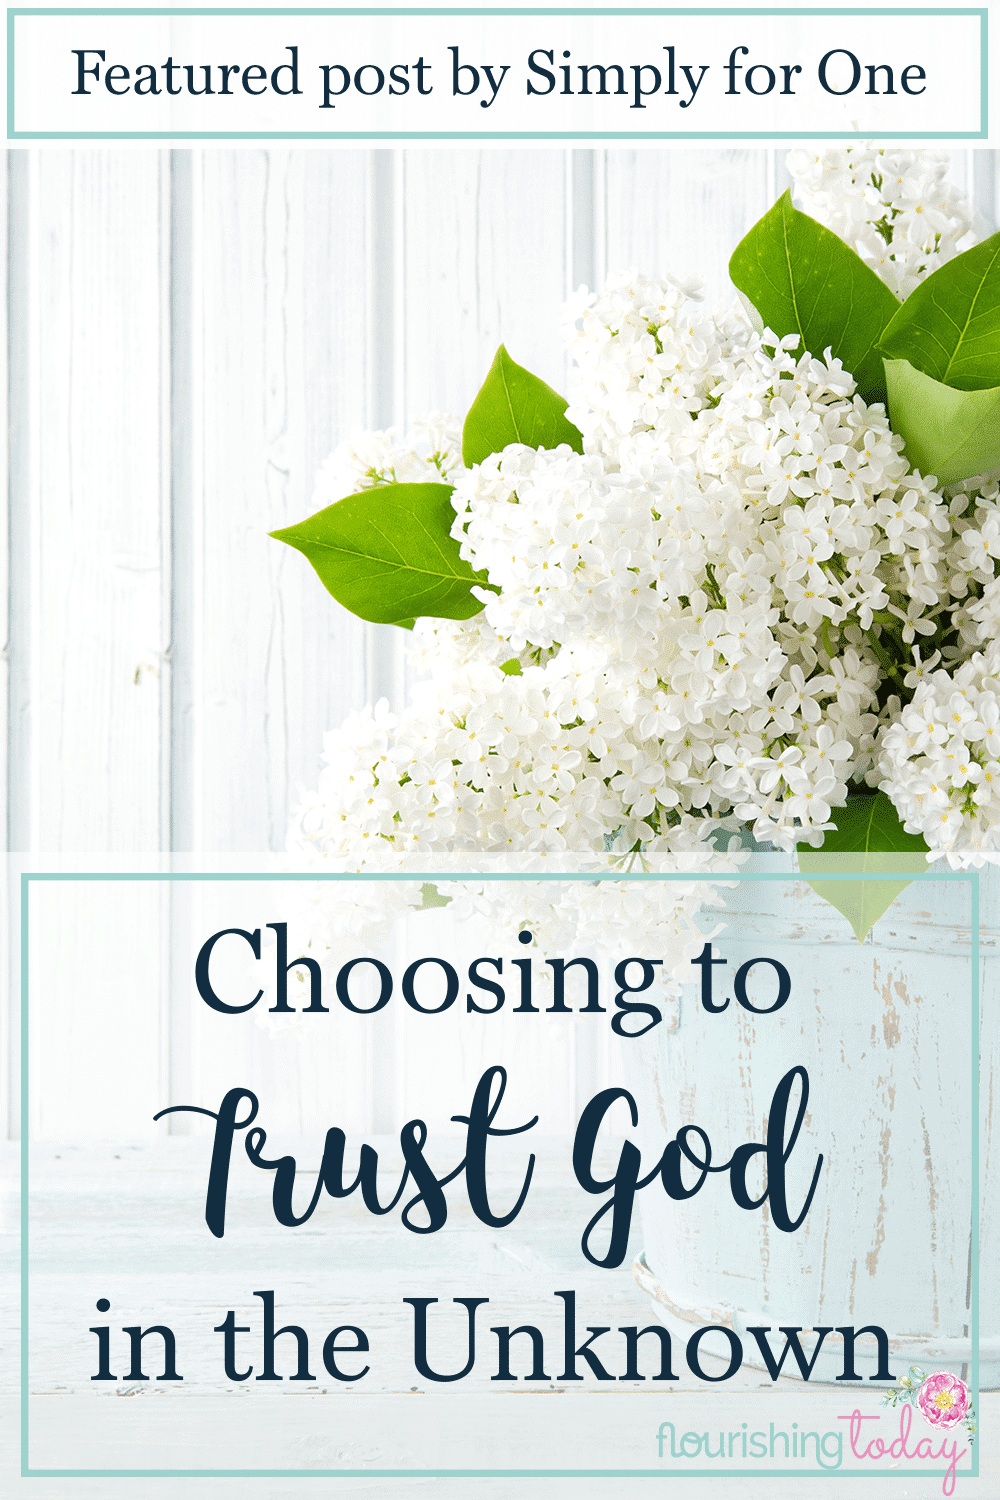 Do you find it difficult to trust to God in the unknown? How do you respond when the future is uncertain? Here are a few tips for learning to trust God.